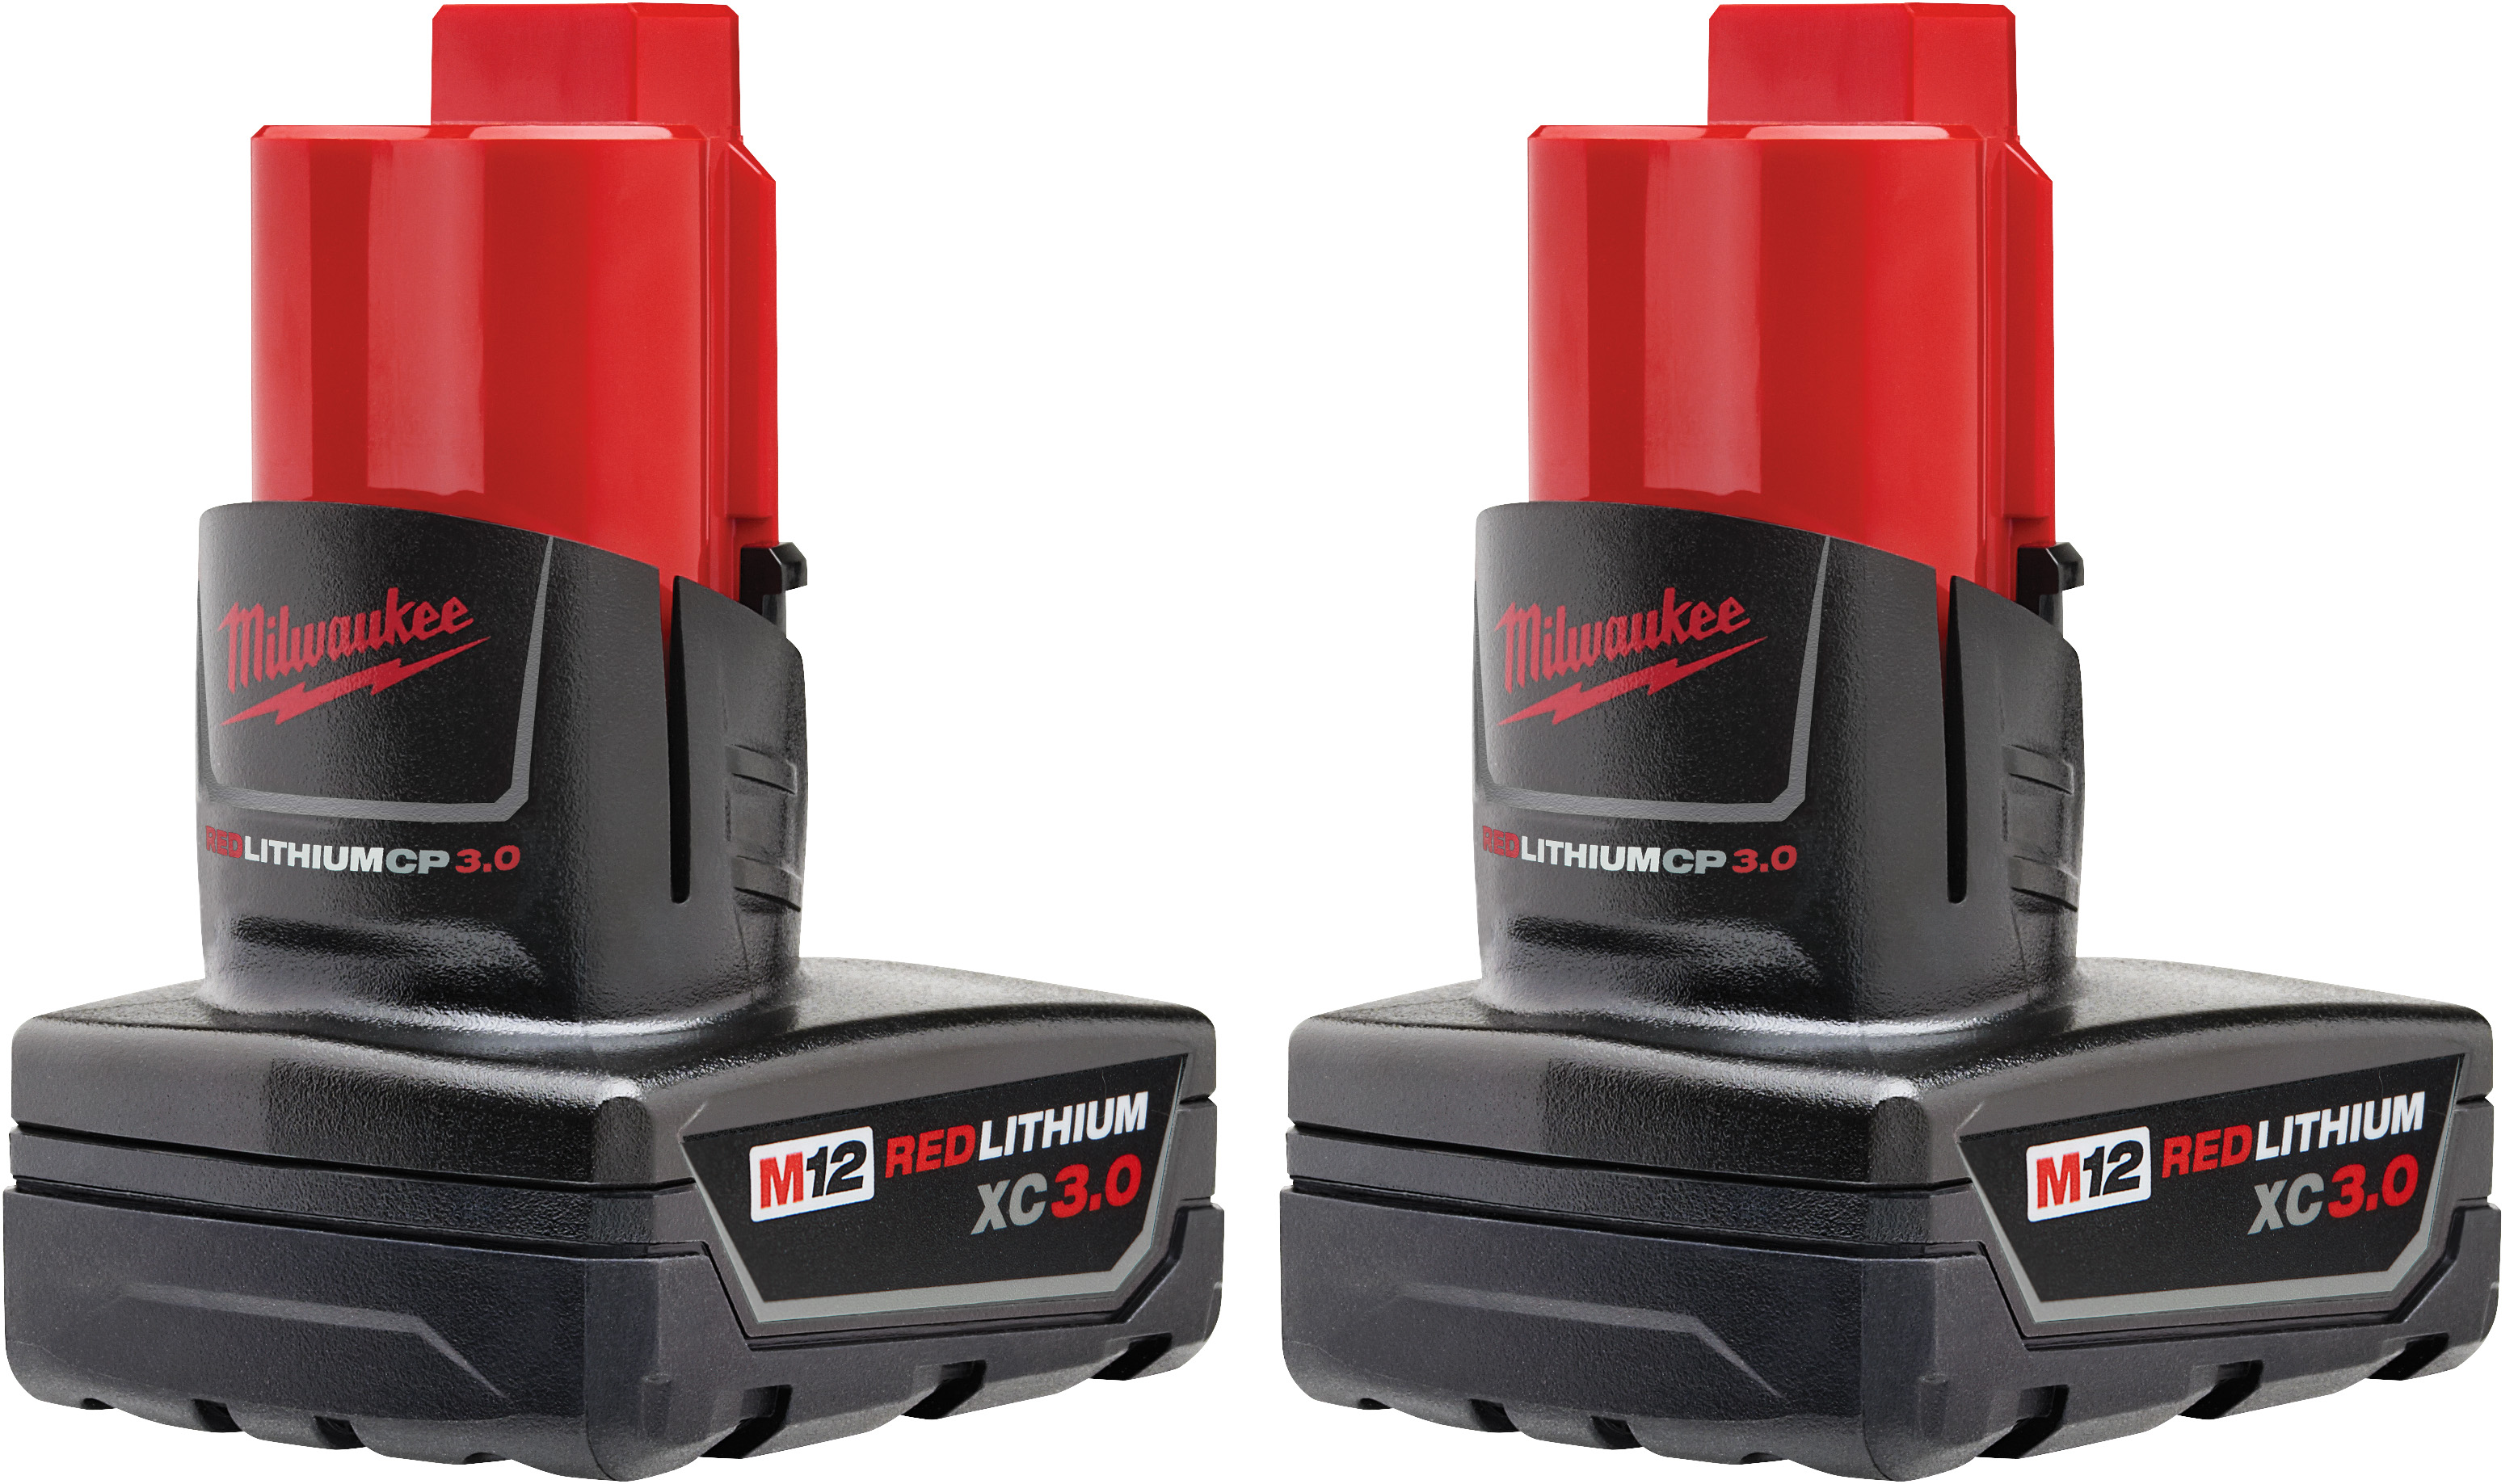 Improving run-time, power and speed; the M12™ XC high capacity REDLITHIUM™ battery will provide 2X the run-time and increased performance as compared to the M12™ compact REDLITHIUM™ battery pack in all M12™ tools. Milwaukee REDLITHIUM™ batteries are...